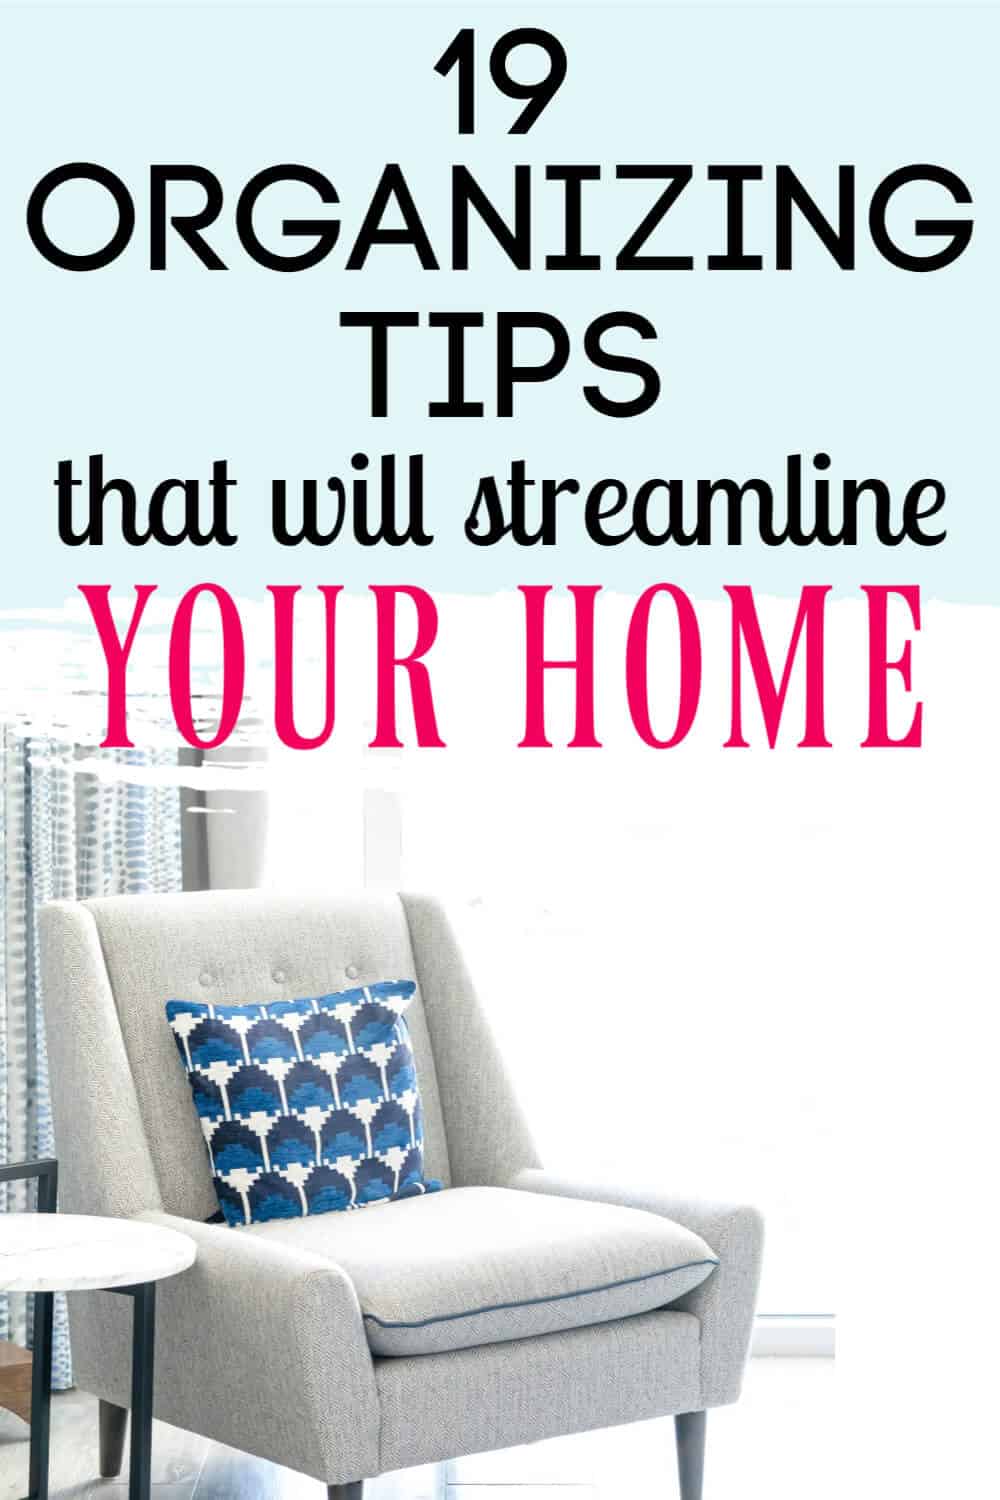 19 Organizing Tips to Streamline Your Home and Life